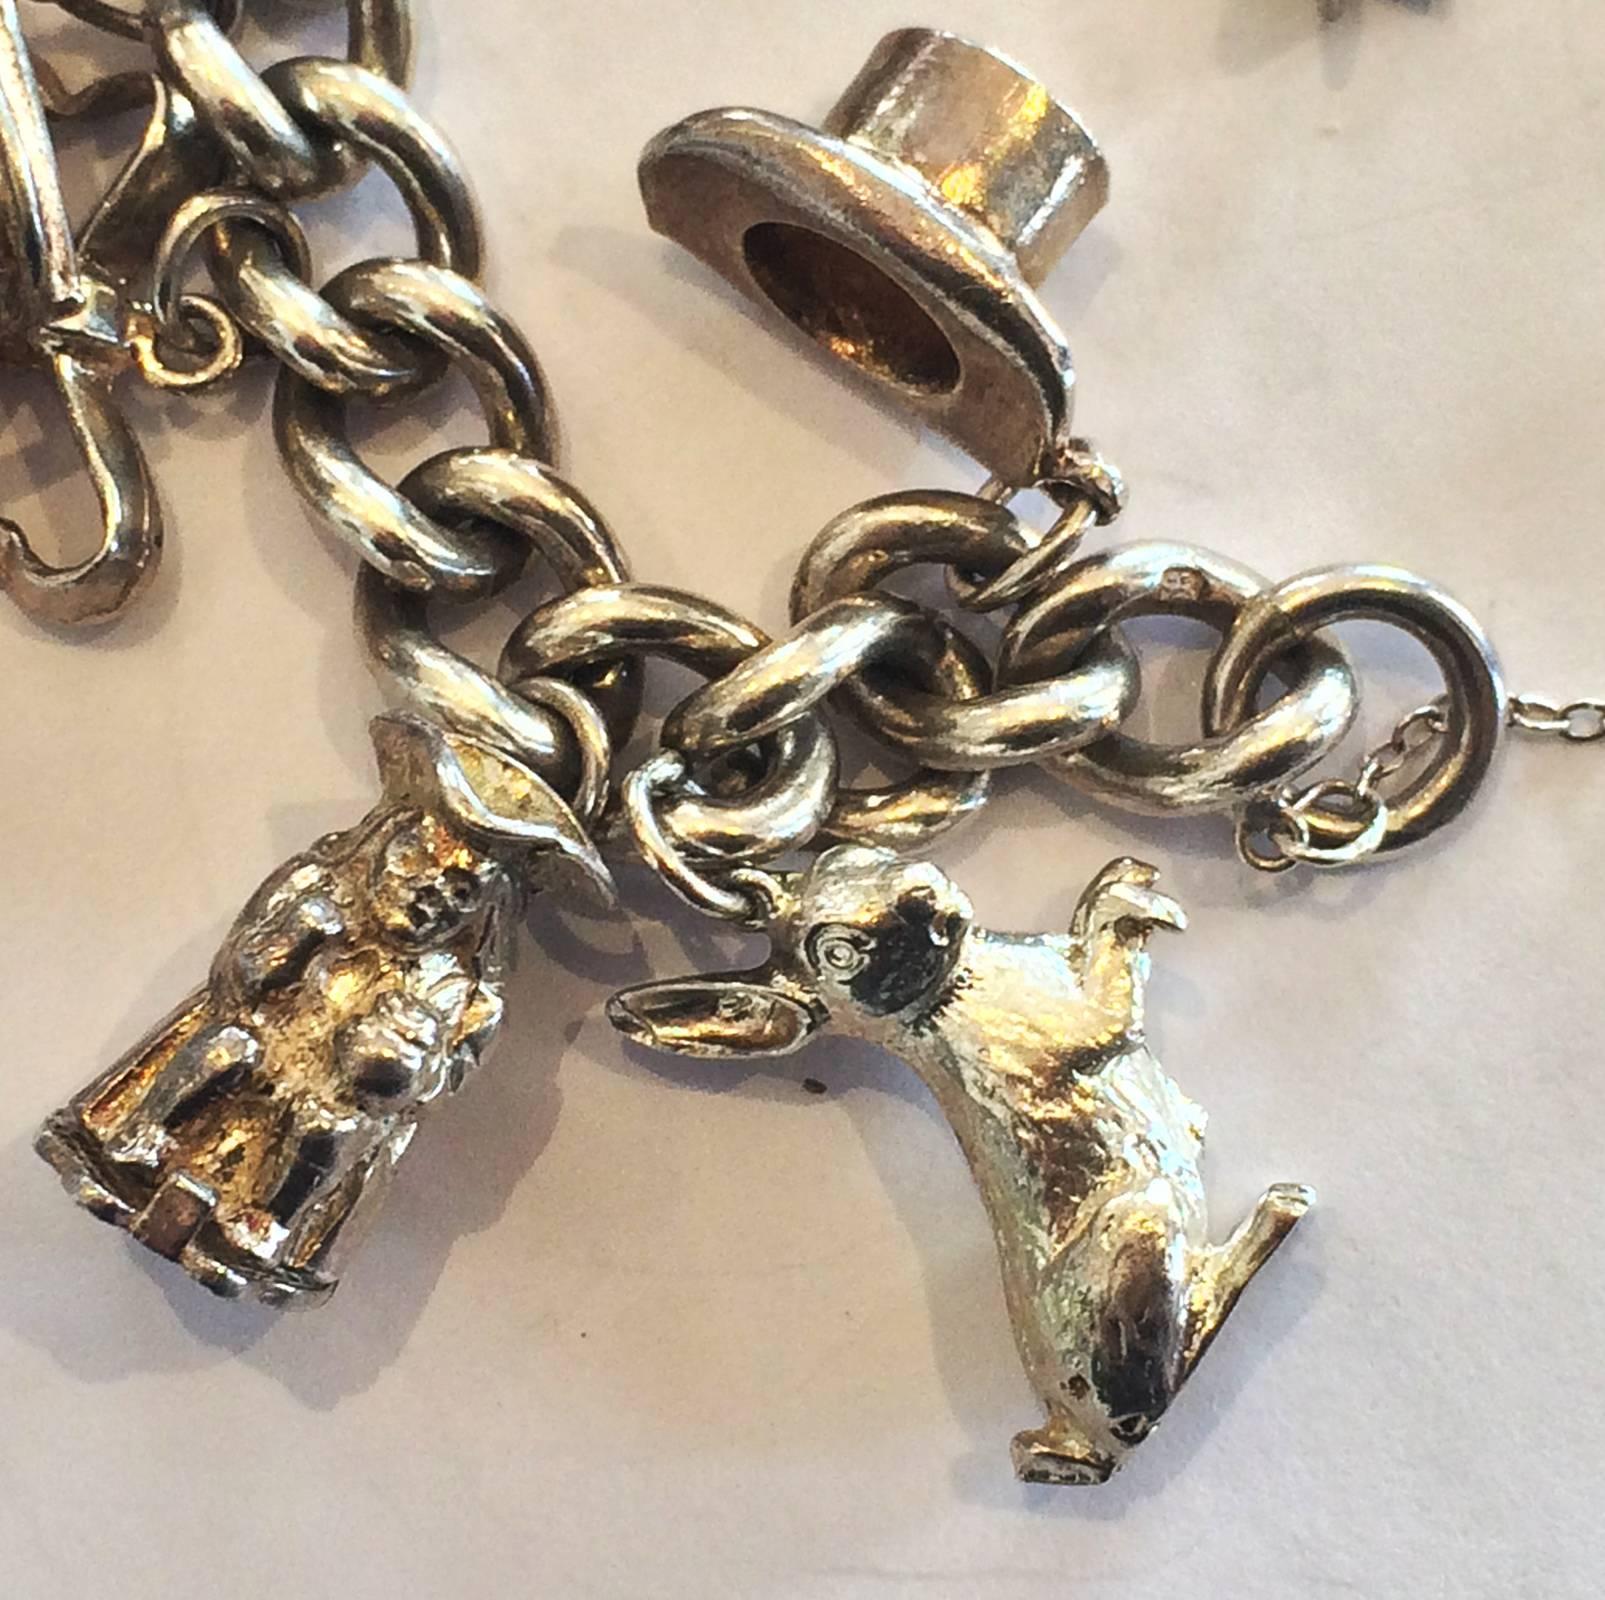 Old Lucky solid Silver Bracelet, heavy quality, Sterling Silver with 16 Lucky Charms, plus silver clasp in form of old Padlock that opens, and safety chain as well. This would be one of the best Bracelets of this type, we have seen. The lock has